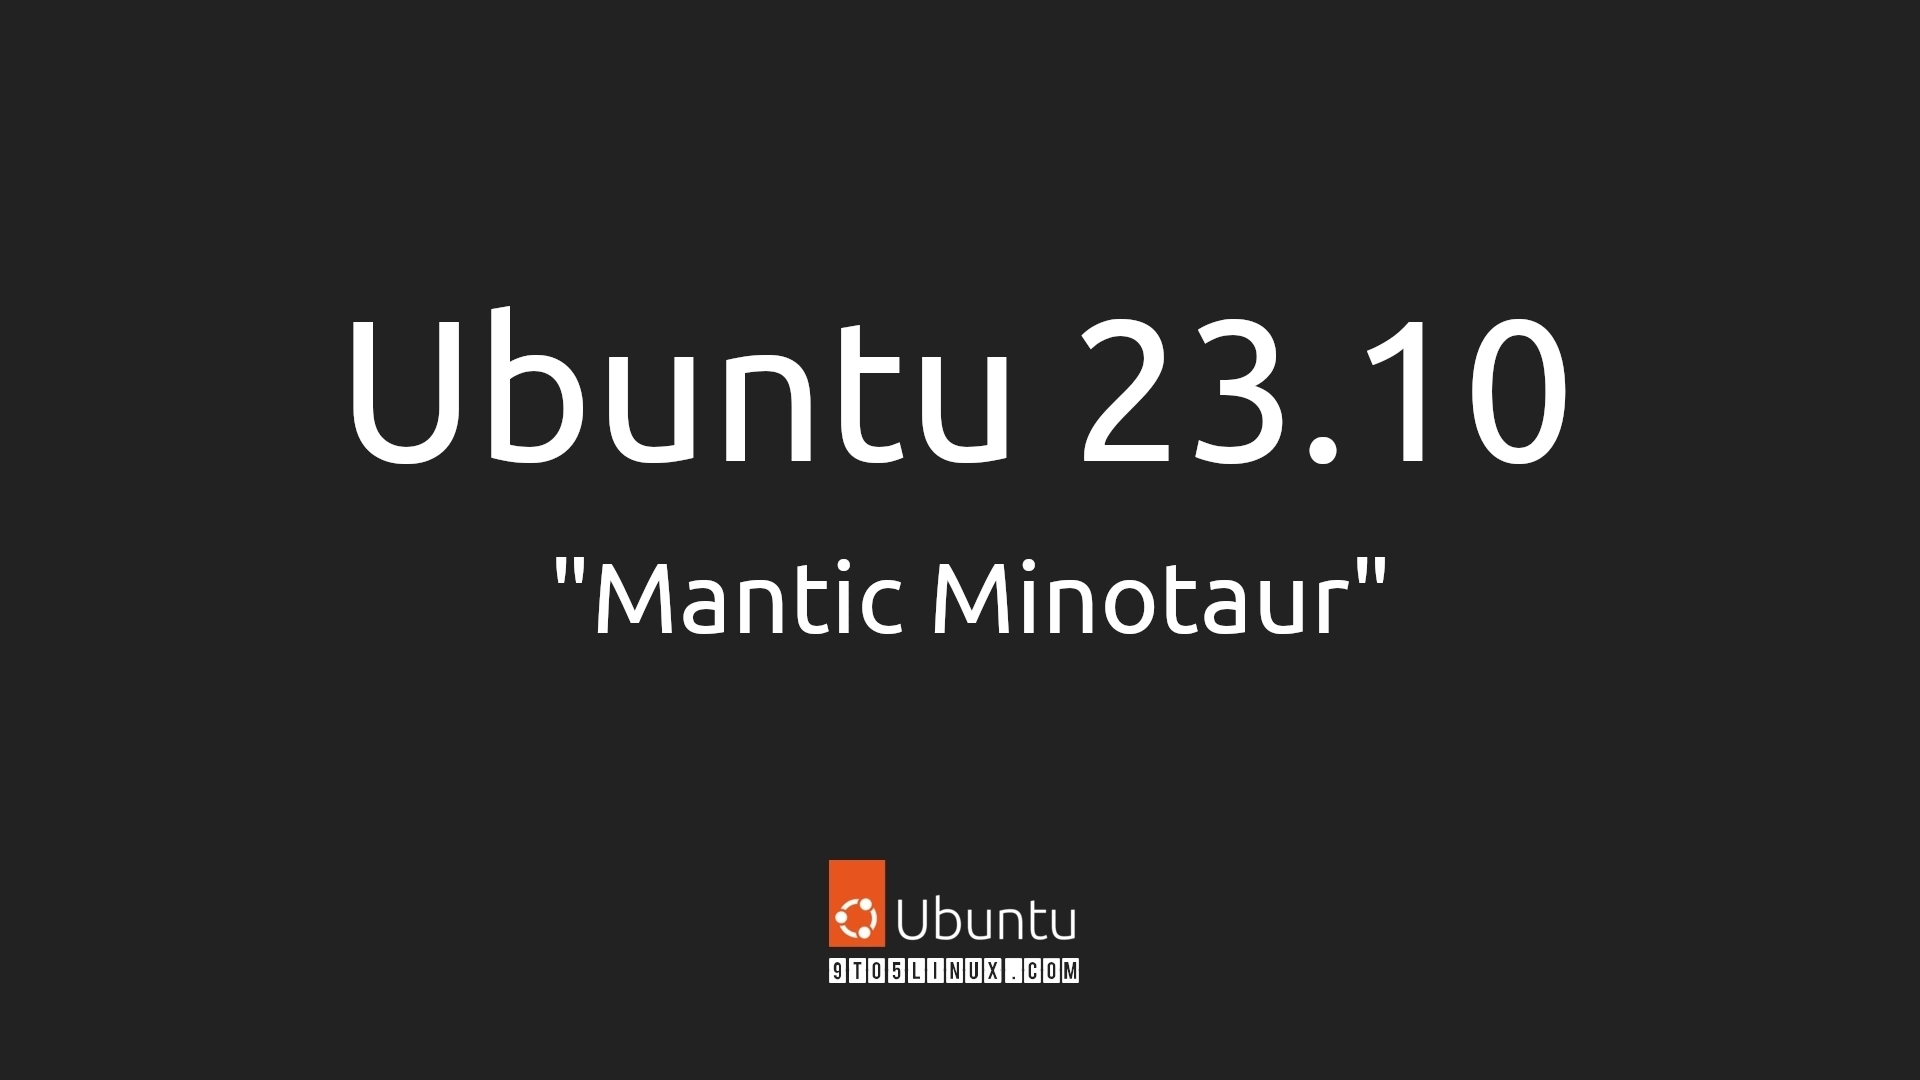 Ubuntu 23.10 “Mantic Minotaur” Is Slated for Release on October 12th, 2023